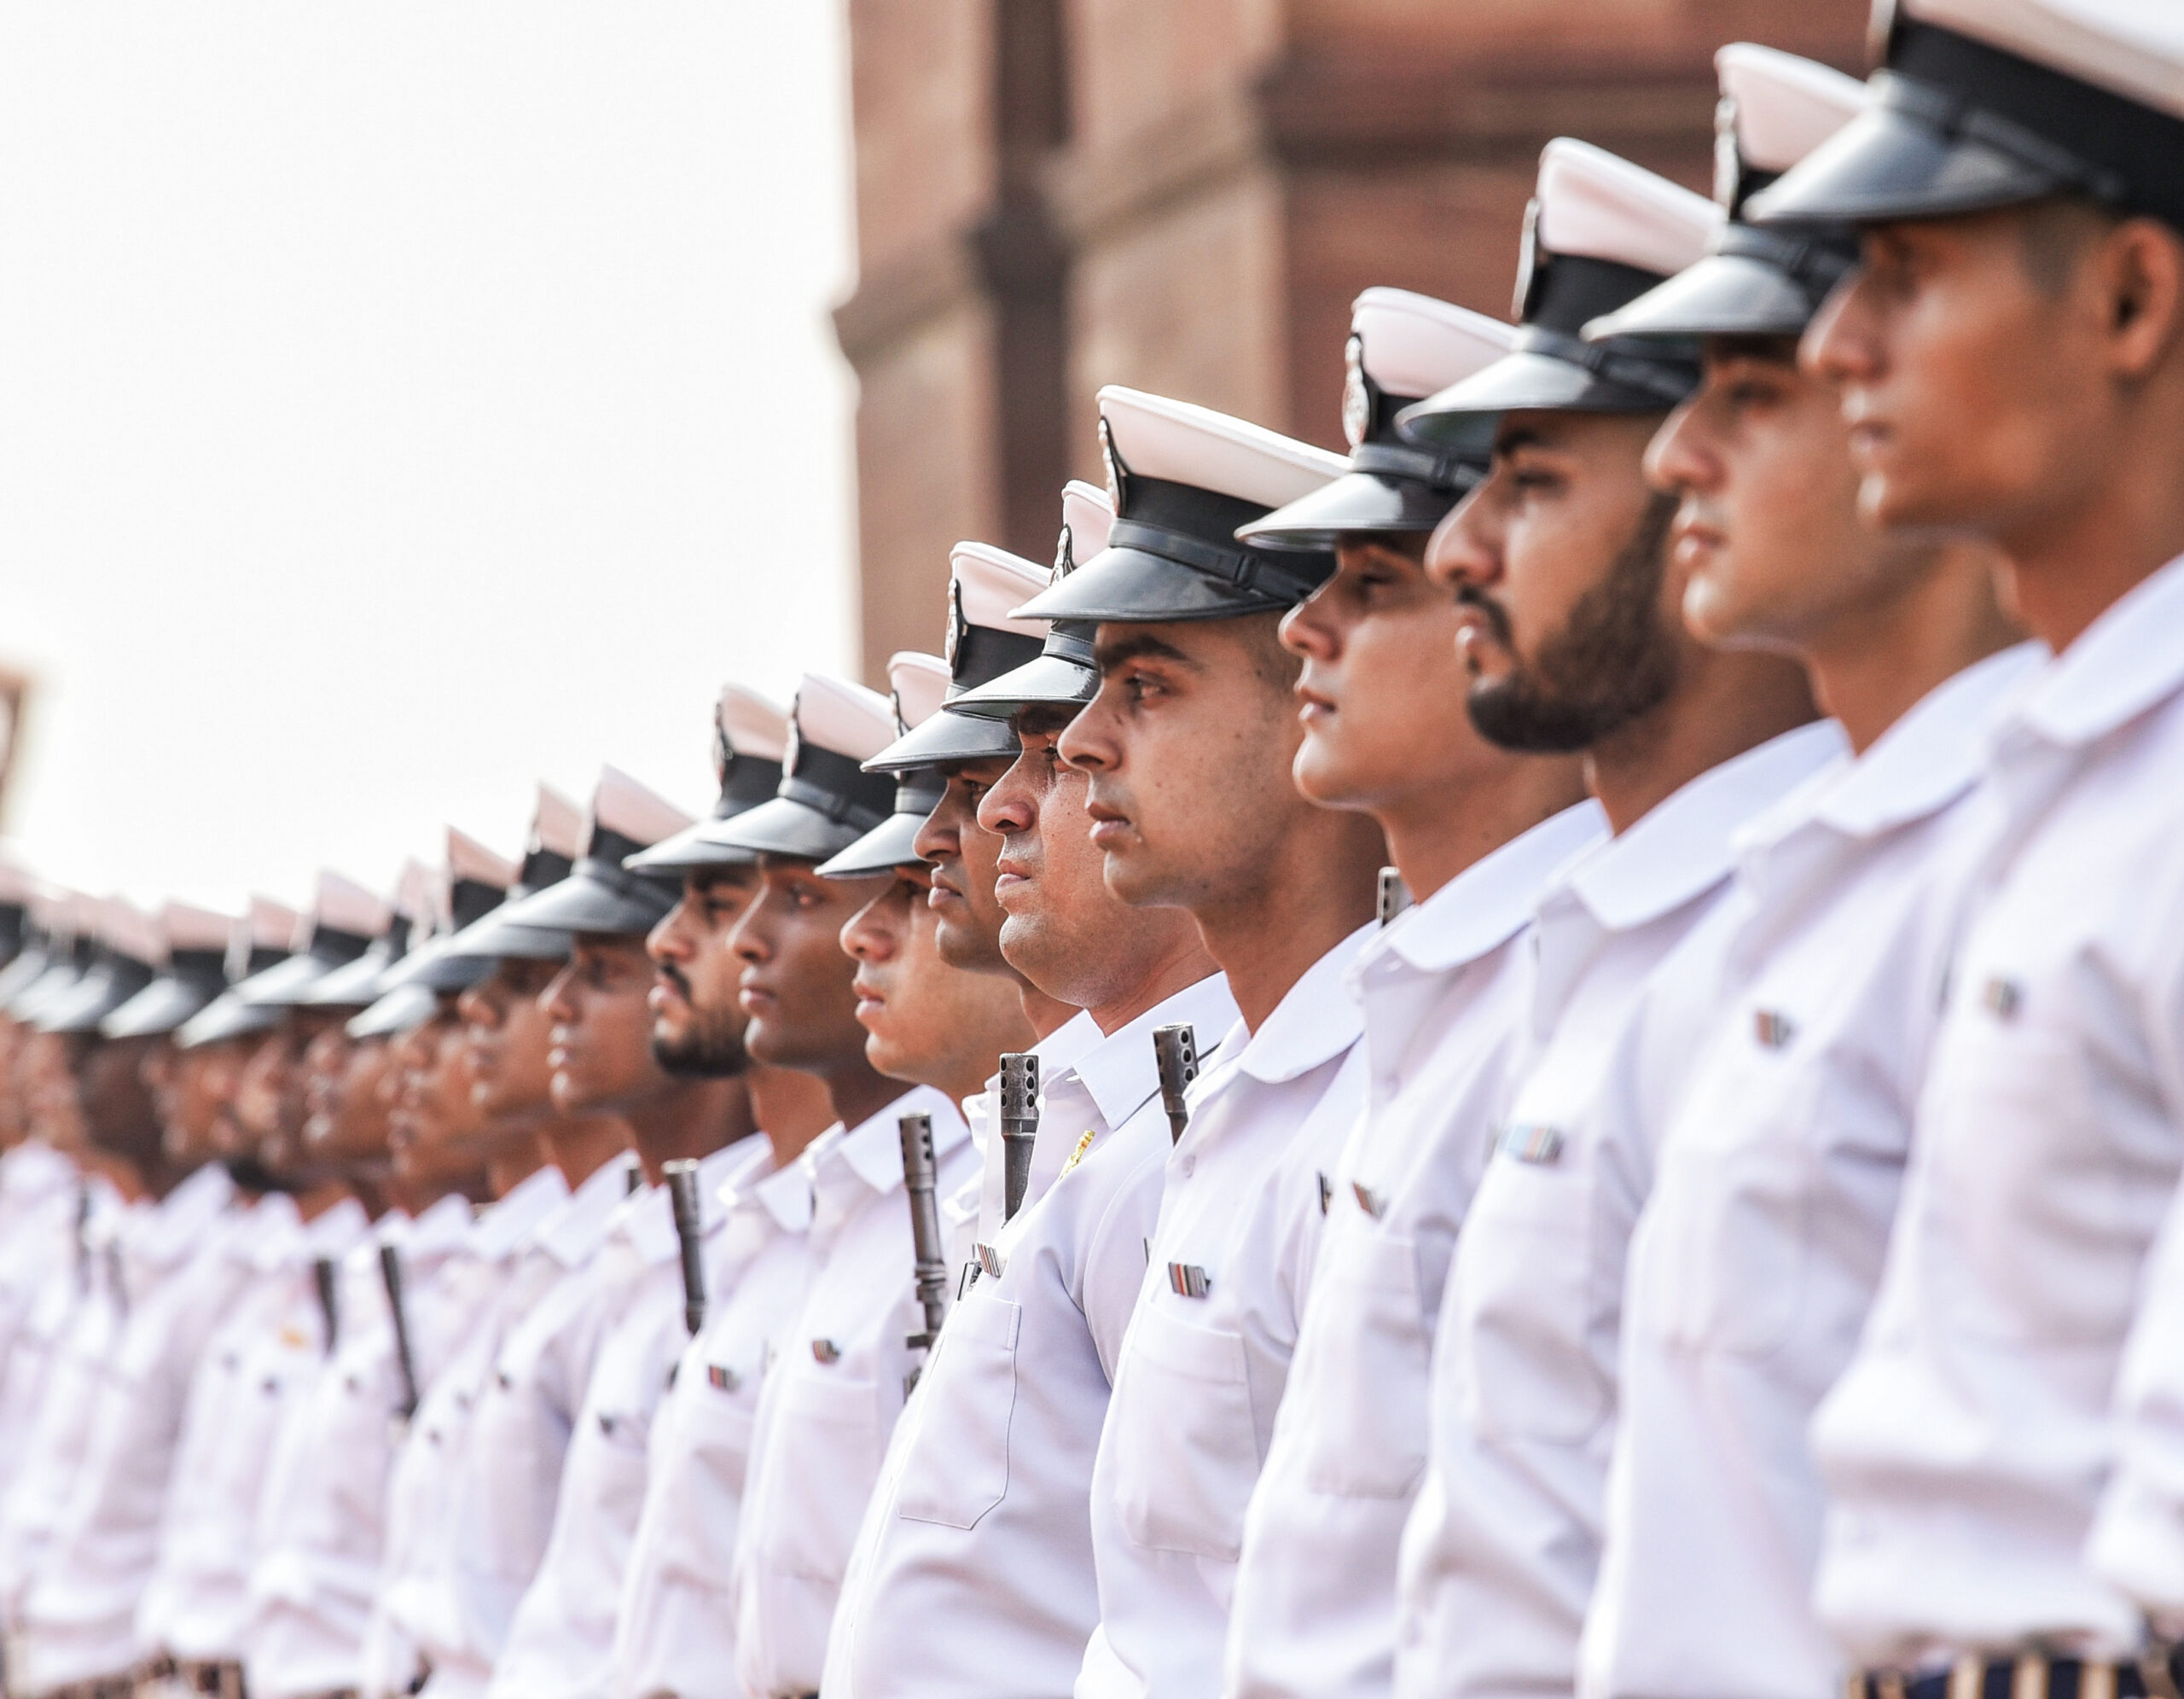 India’s efforts to assist its former Navy officers will be complicated by a complex geopolitical environment